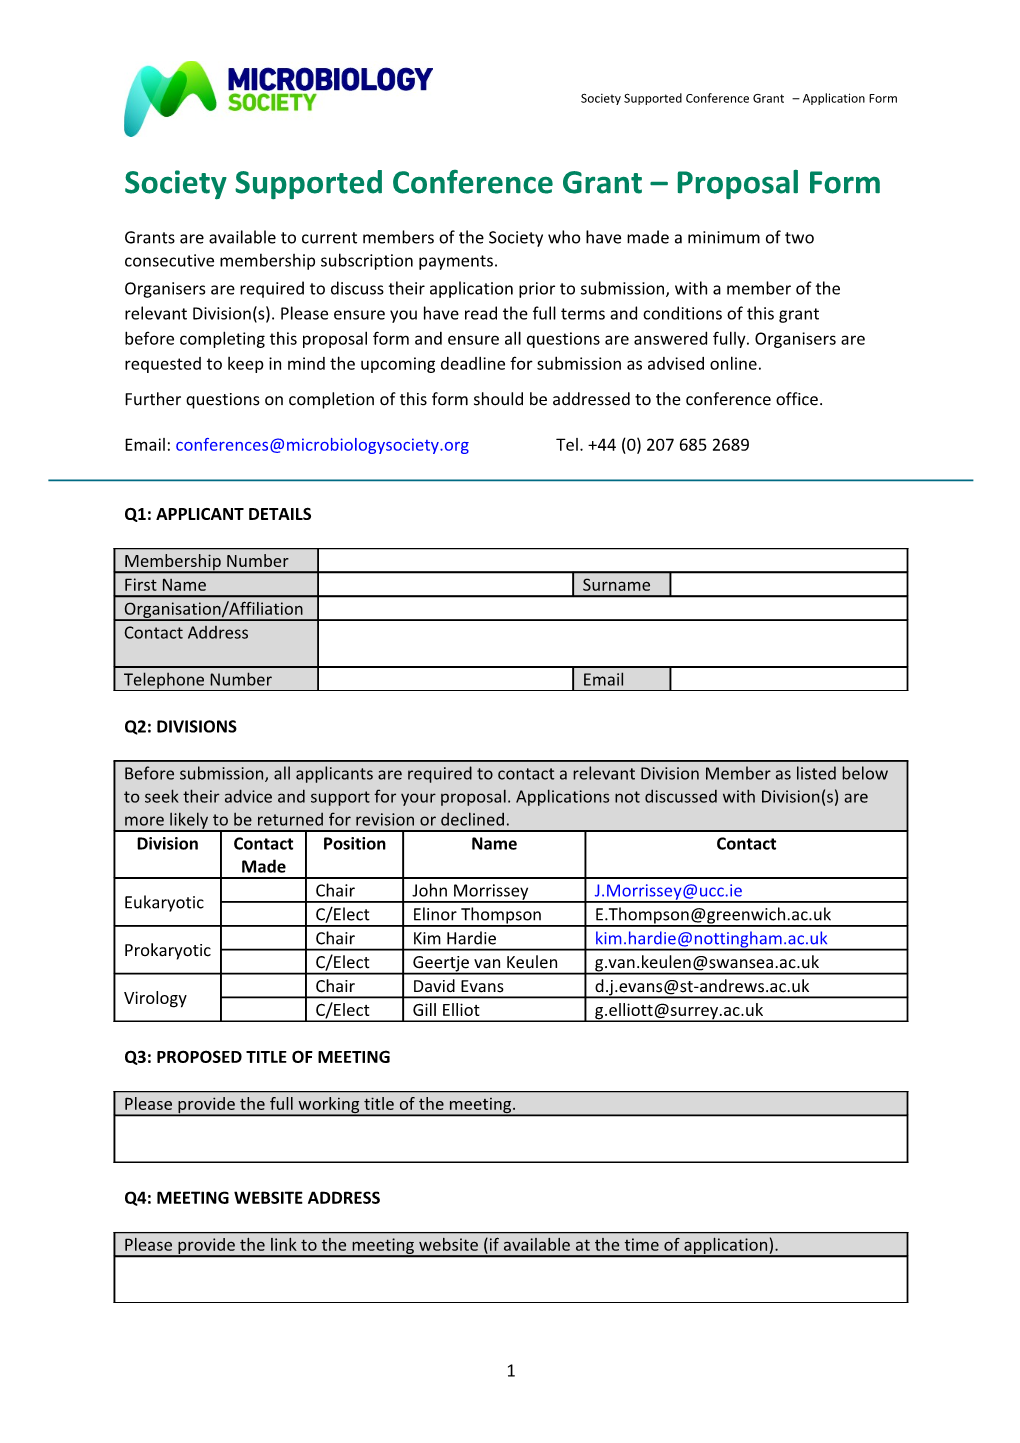 Society Supported Conference Grant Proposal Form